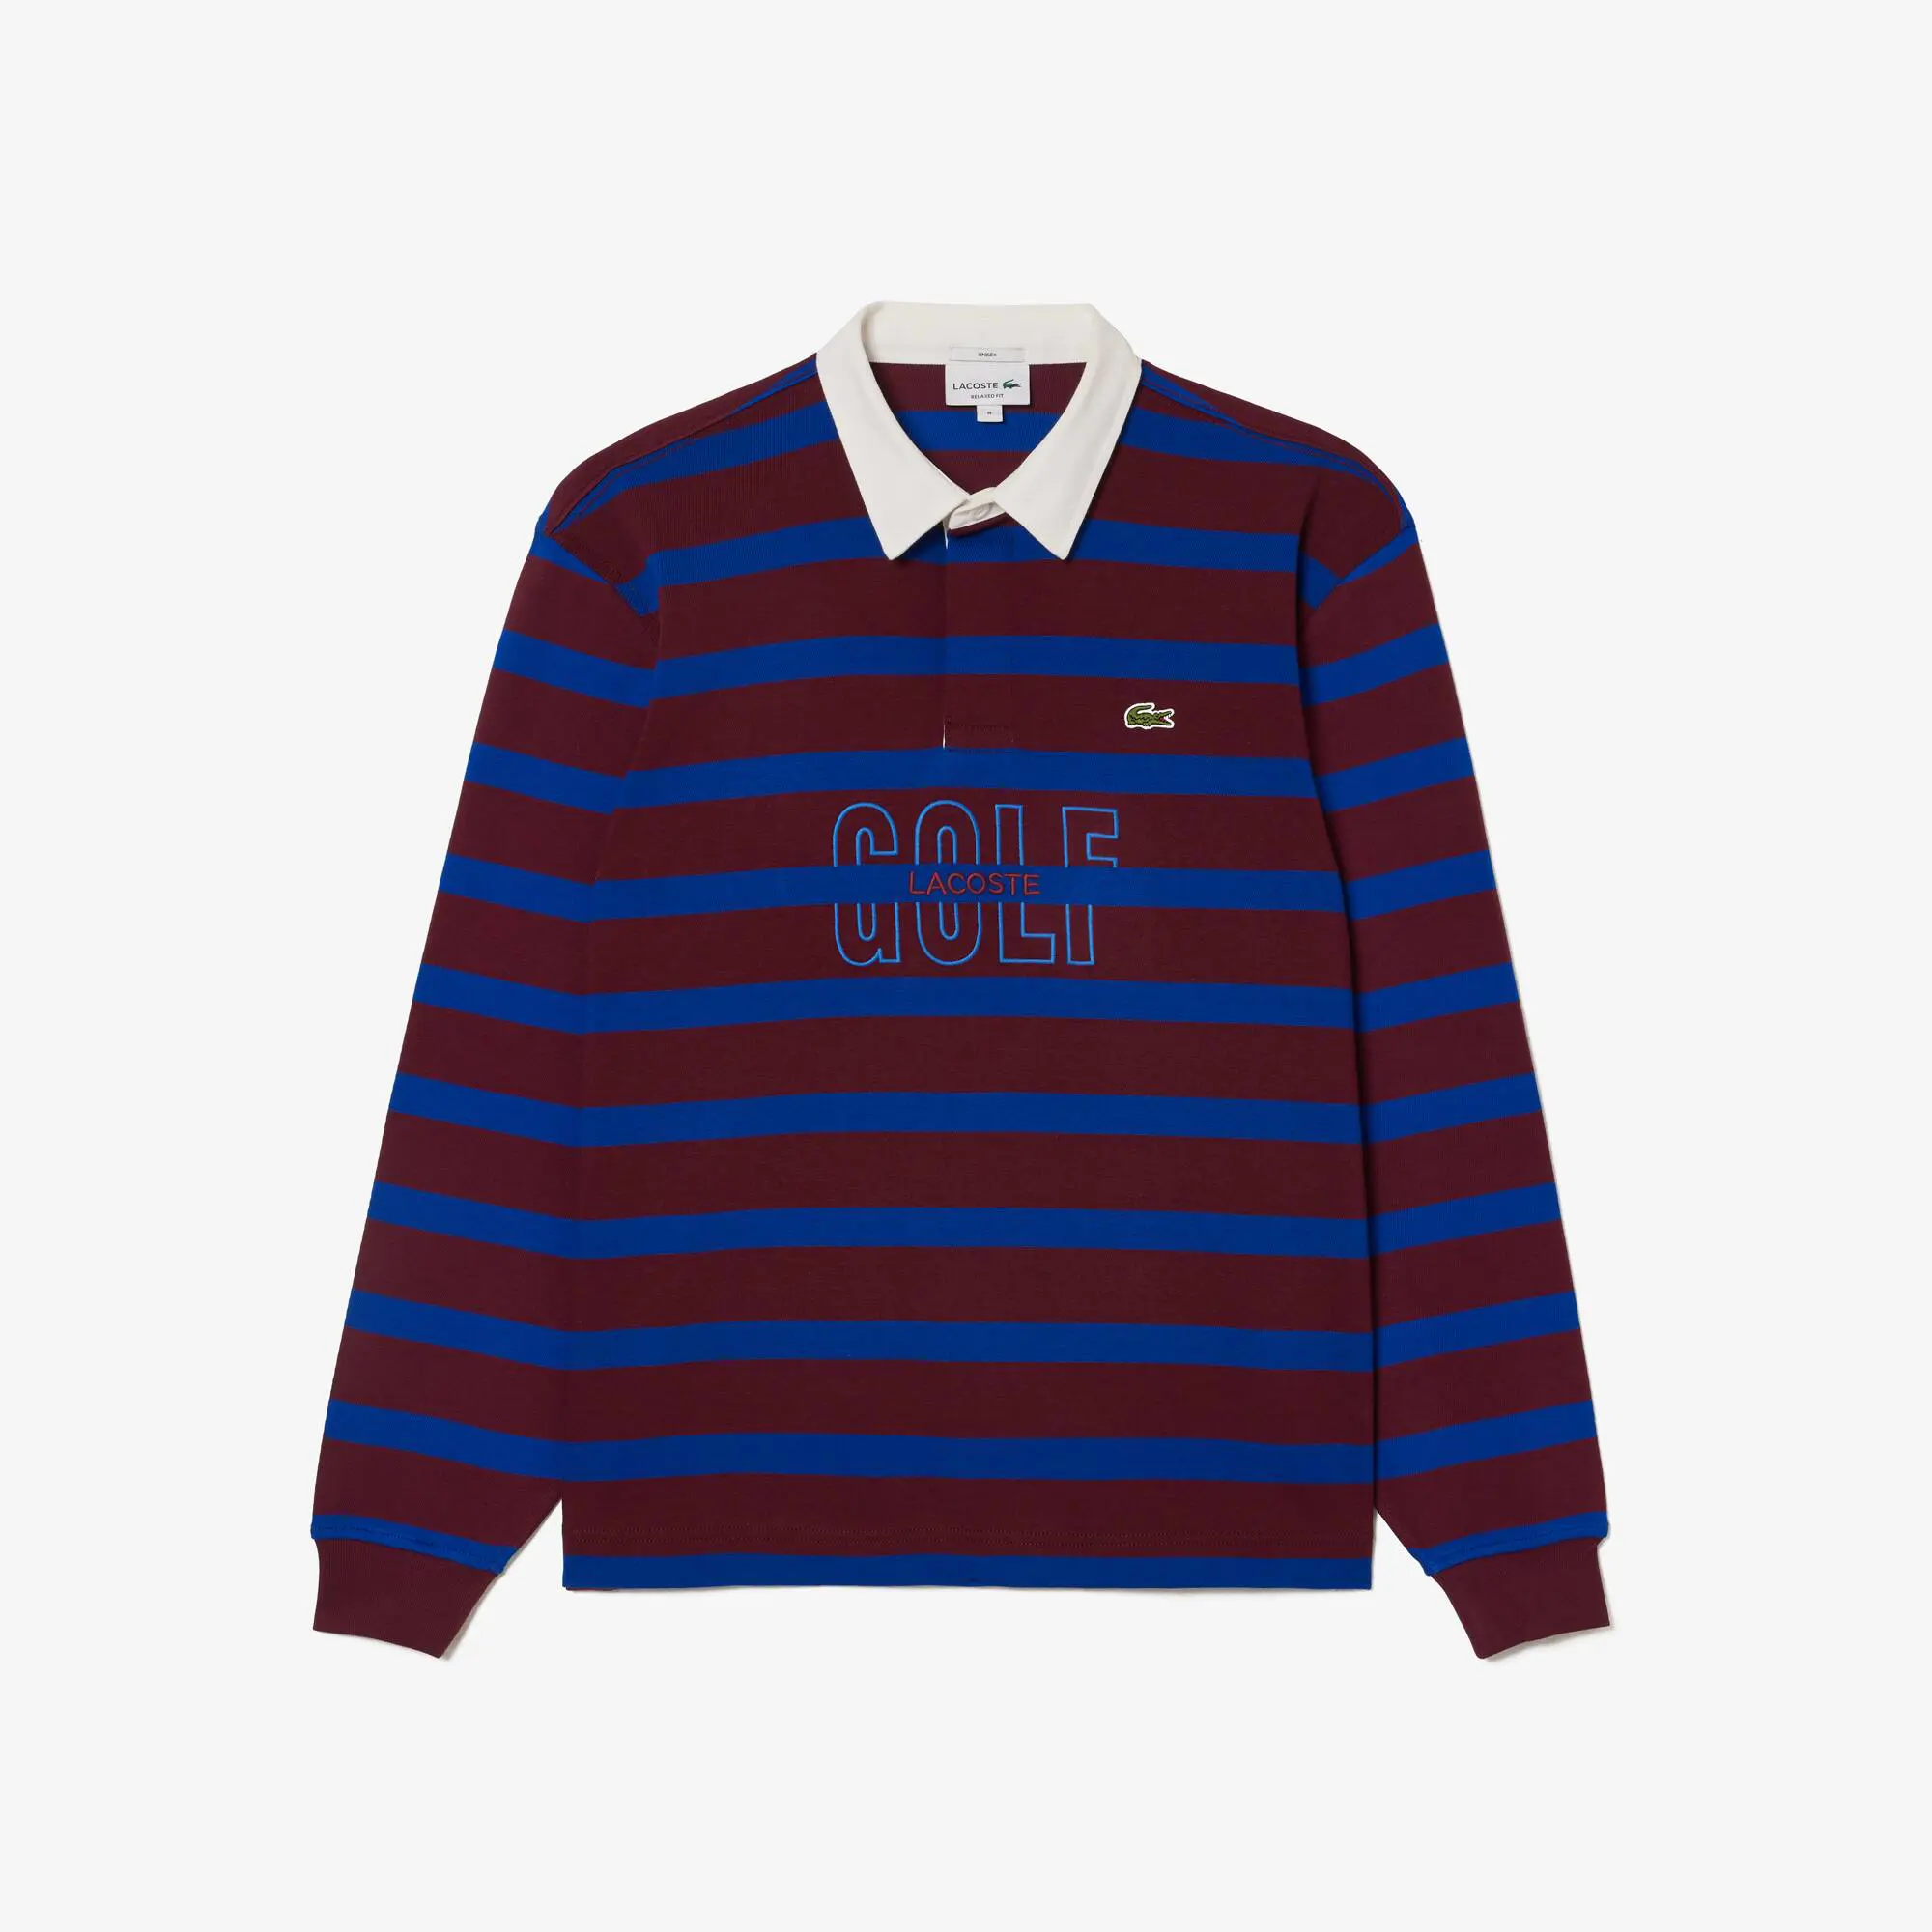 Lacoste Unisex Long Sleeve Striped Rugby Shirt. 1